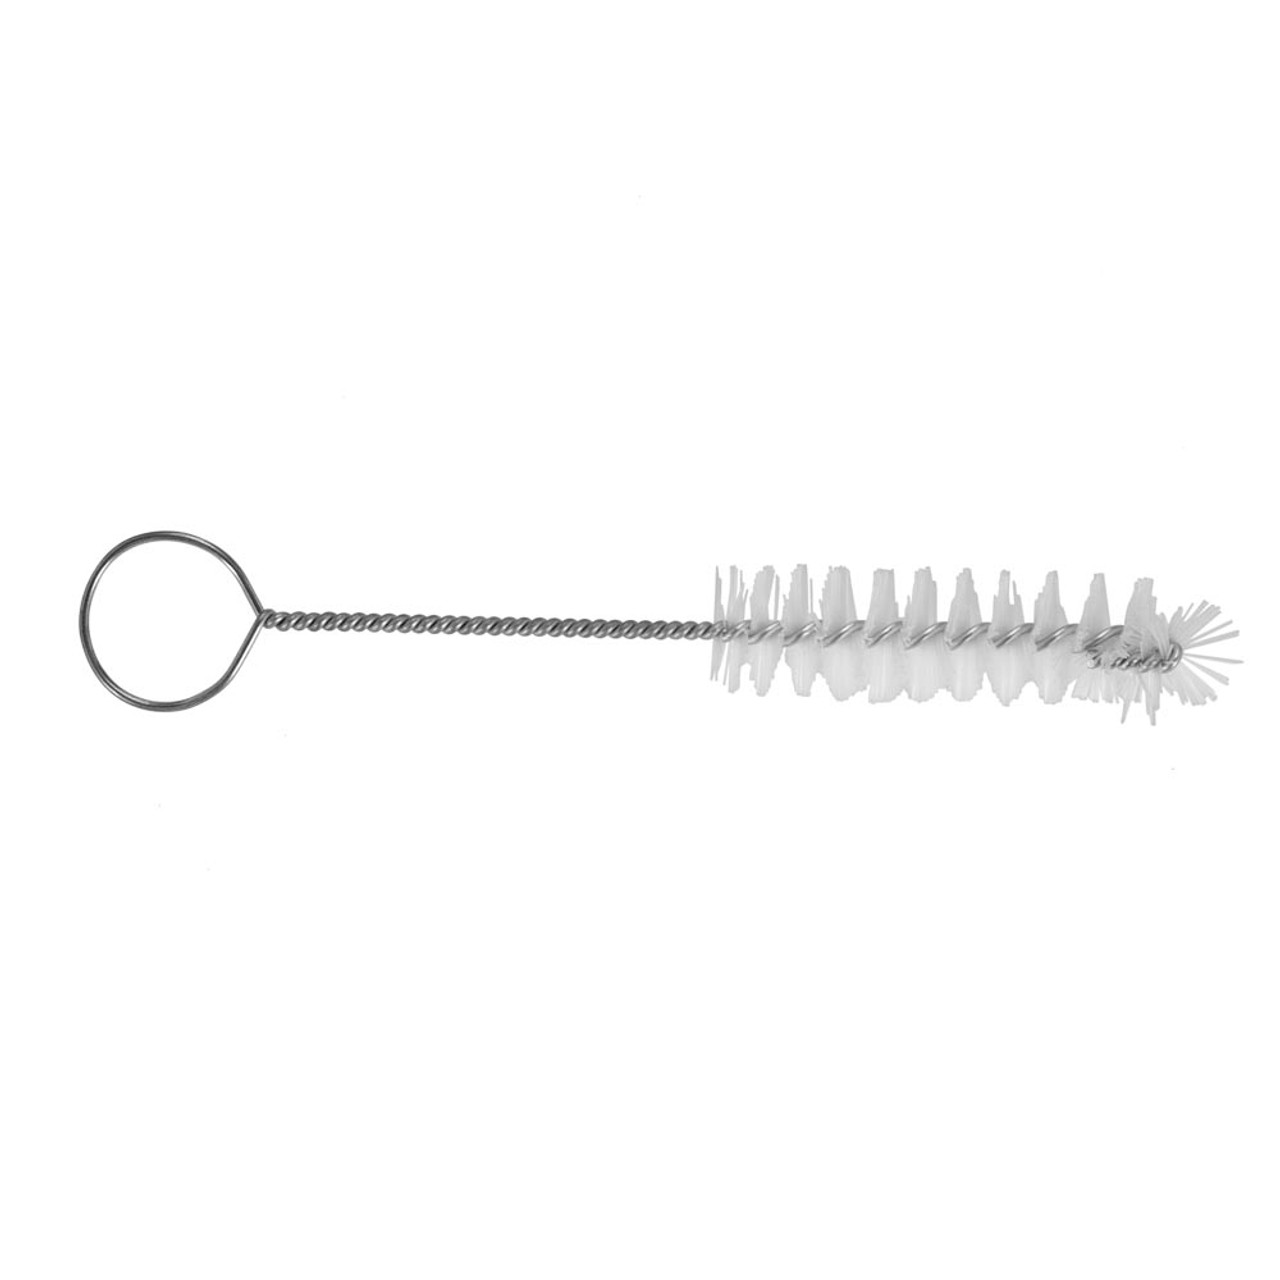 Commercial Drain Cleaning Brush - Extra Long - 1.5 inch